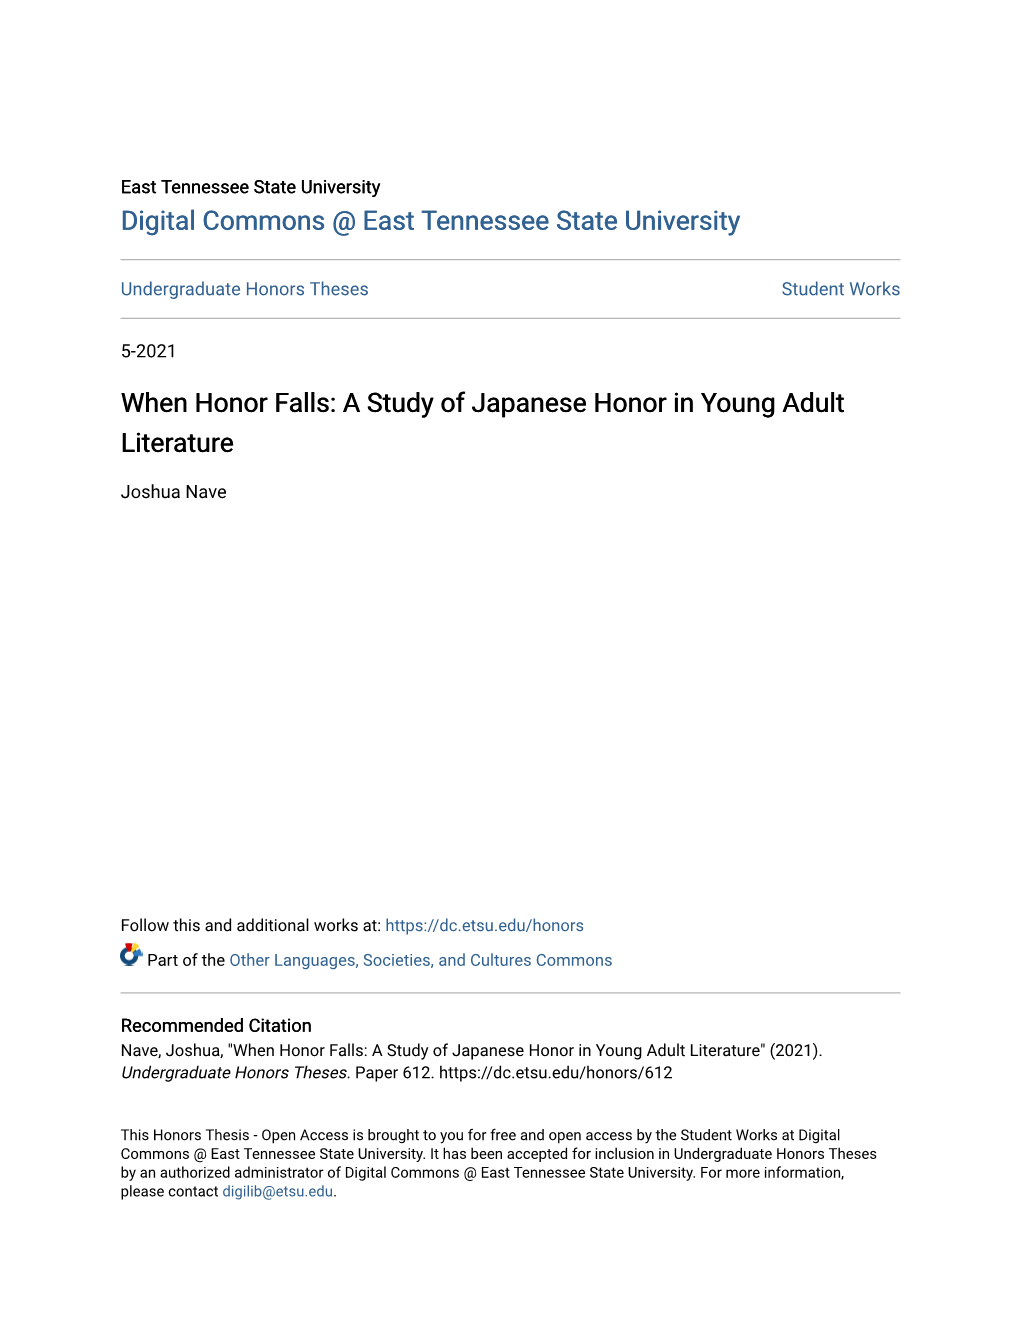 A Study of Japanese Honor in Young Adult Literature